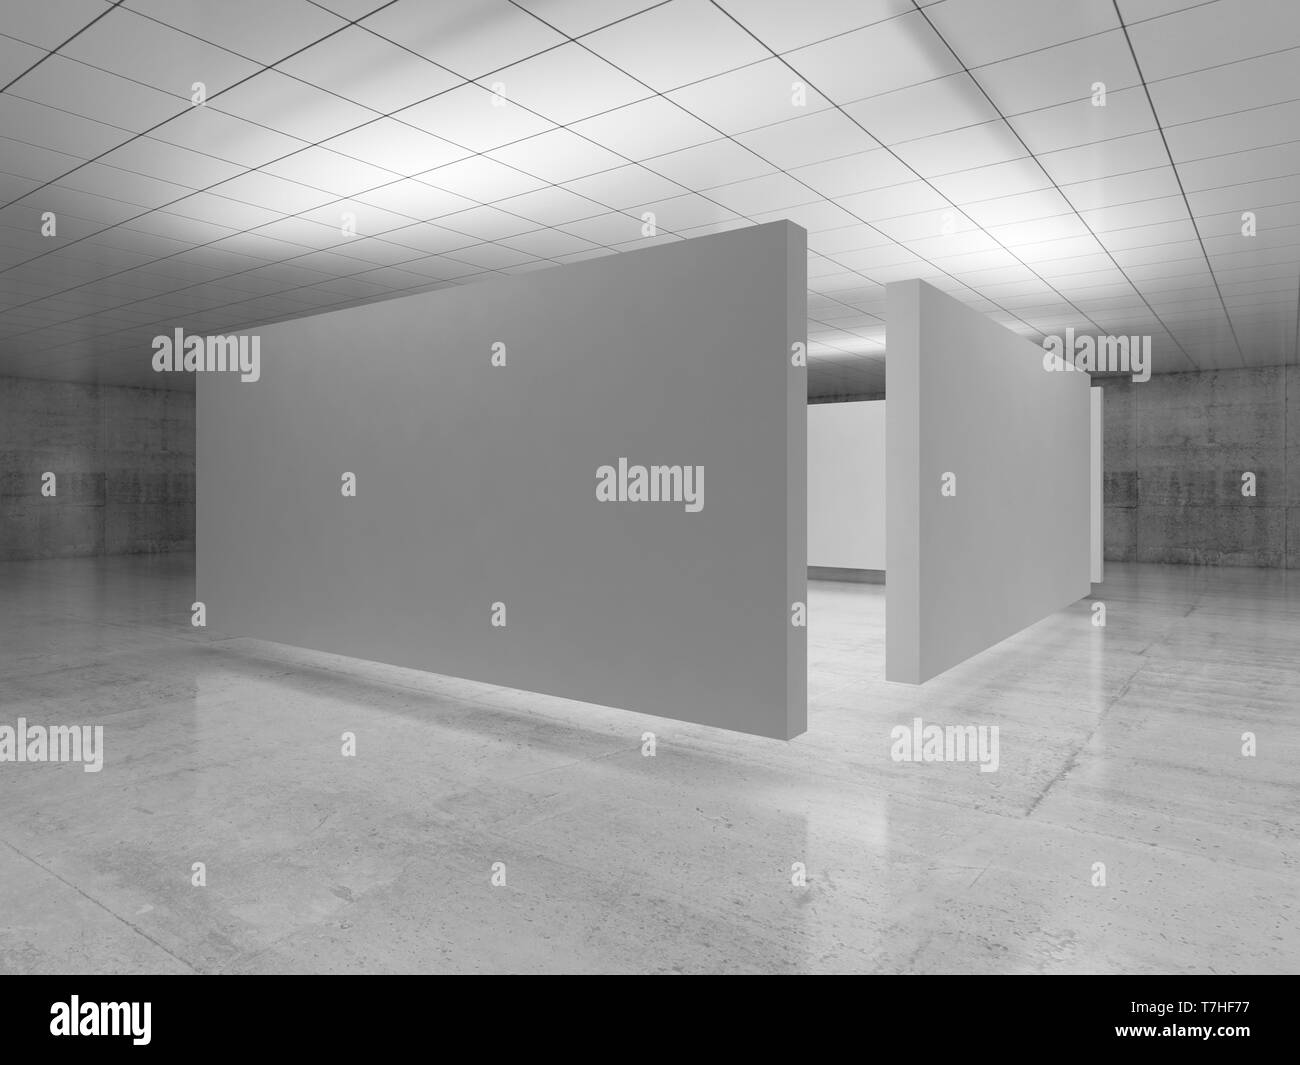 Abstract empty minimalist interior design, white stands installation levitating in exhibition gallery with walls made of polished concrete and shiny c Stock Photo